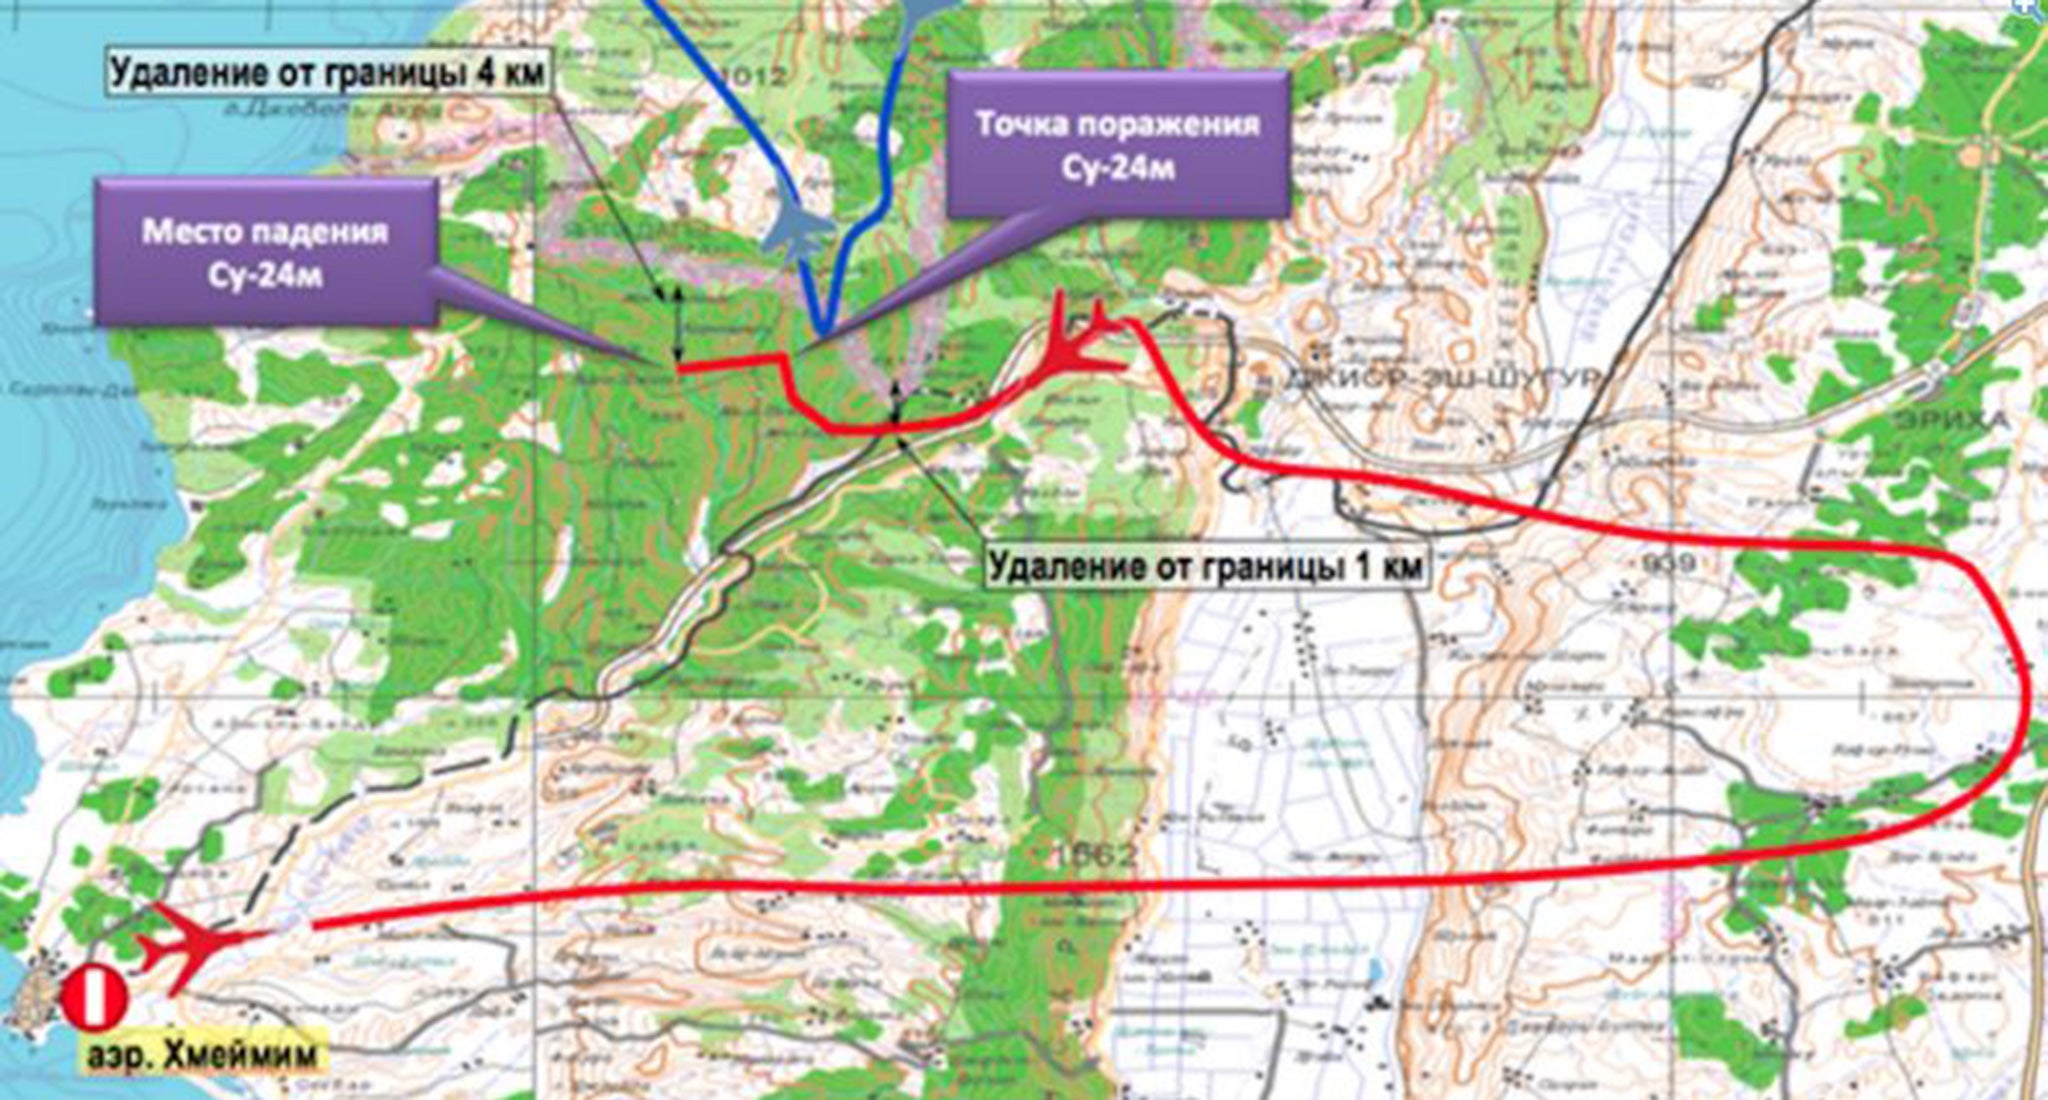 A map released by Russian authorities purporting to show where the plane made a 90 degree turn